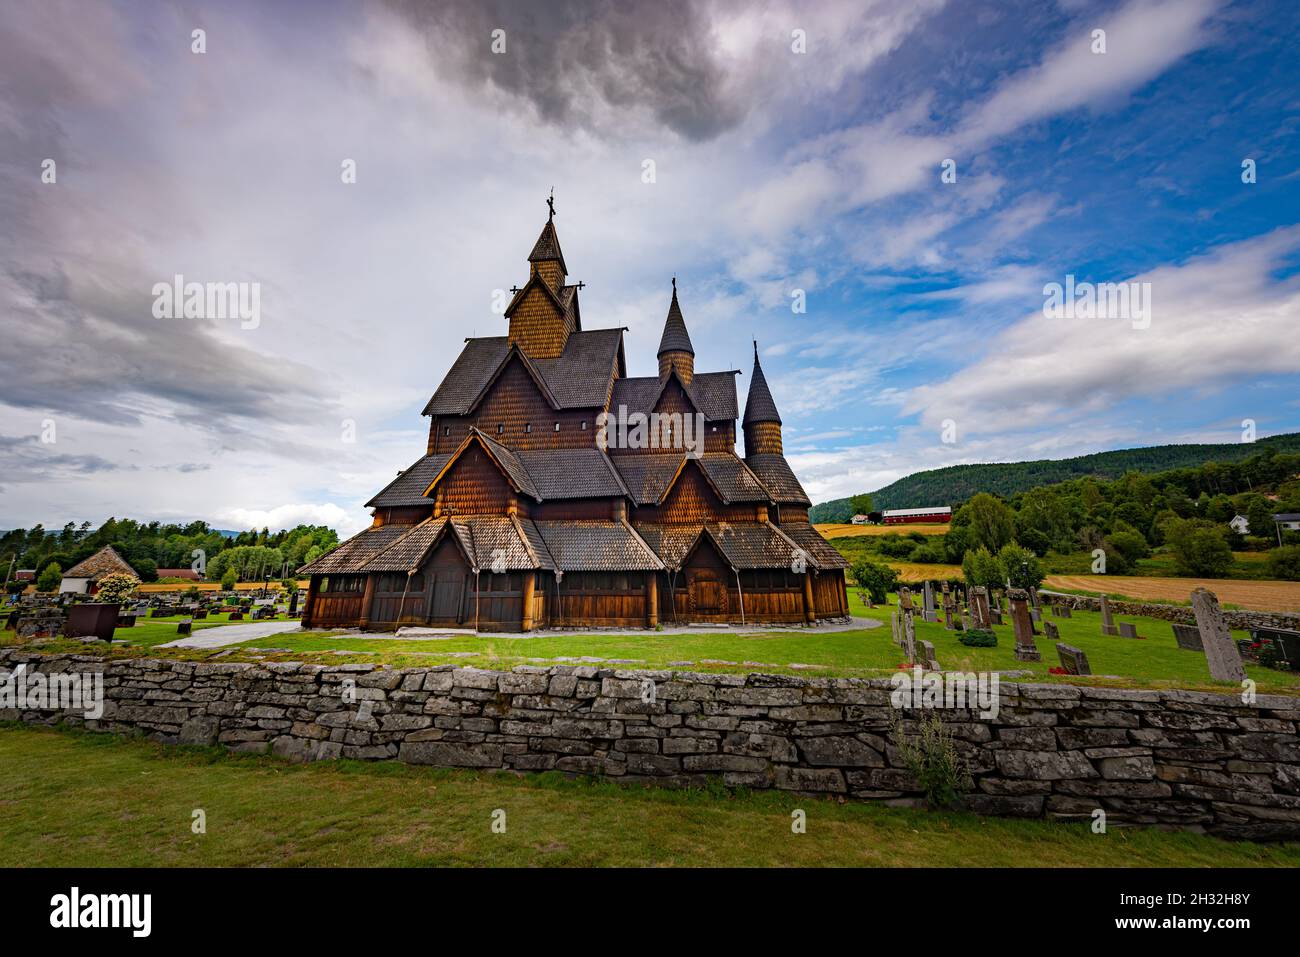 Heddal Church Norway's largest stave church build in 13th centruy Stock Photo